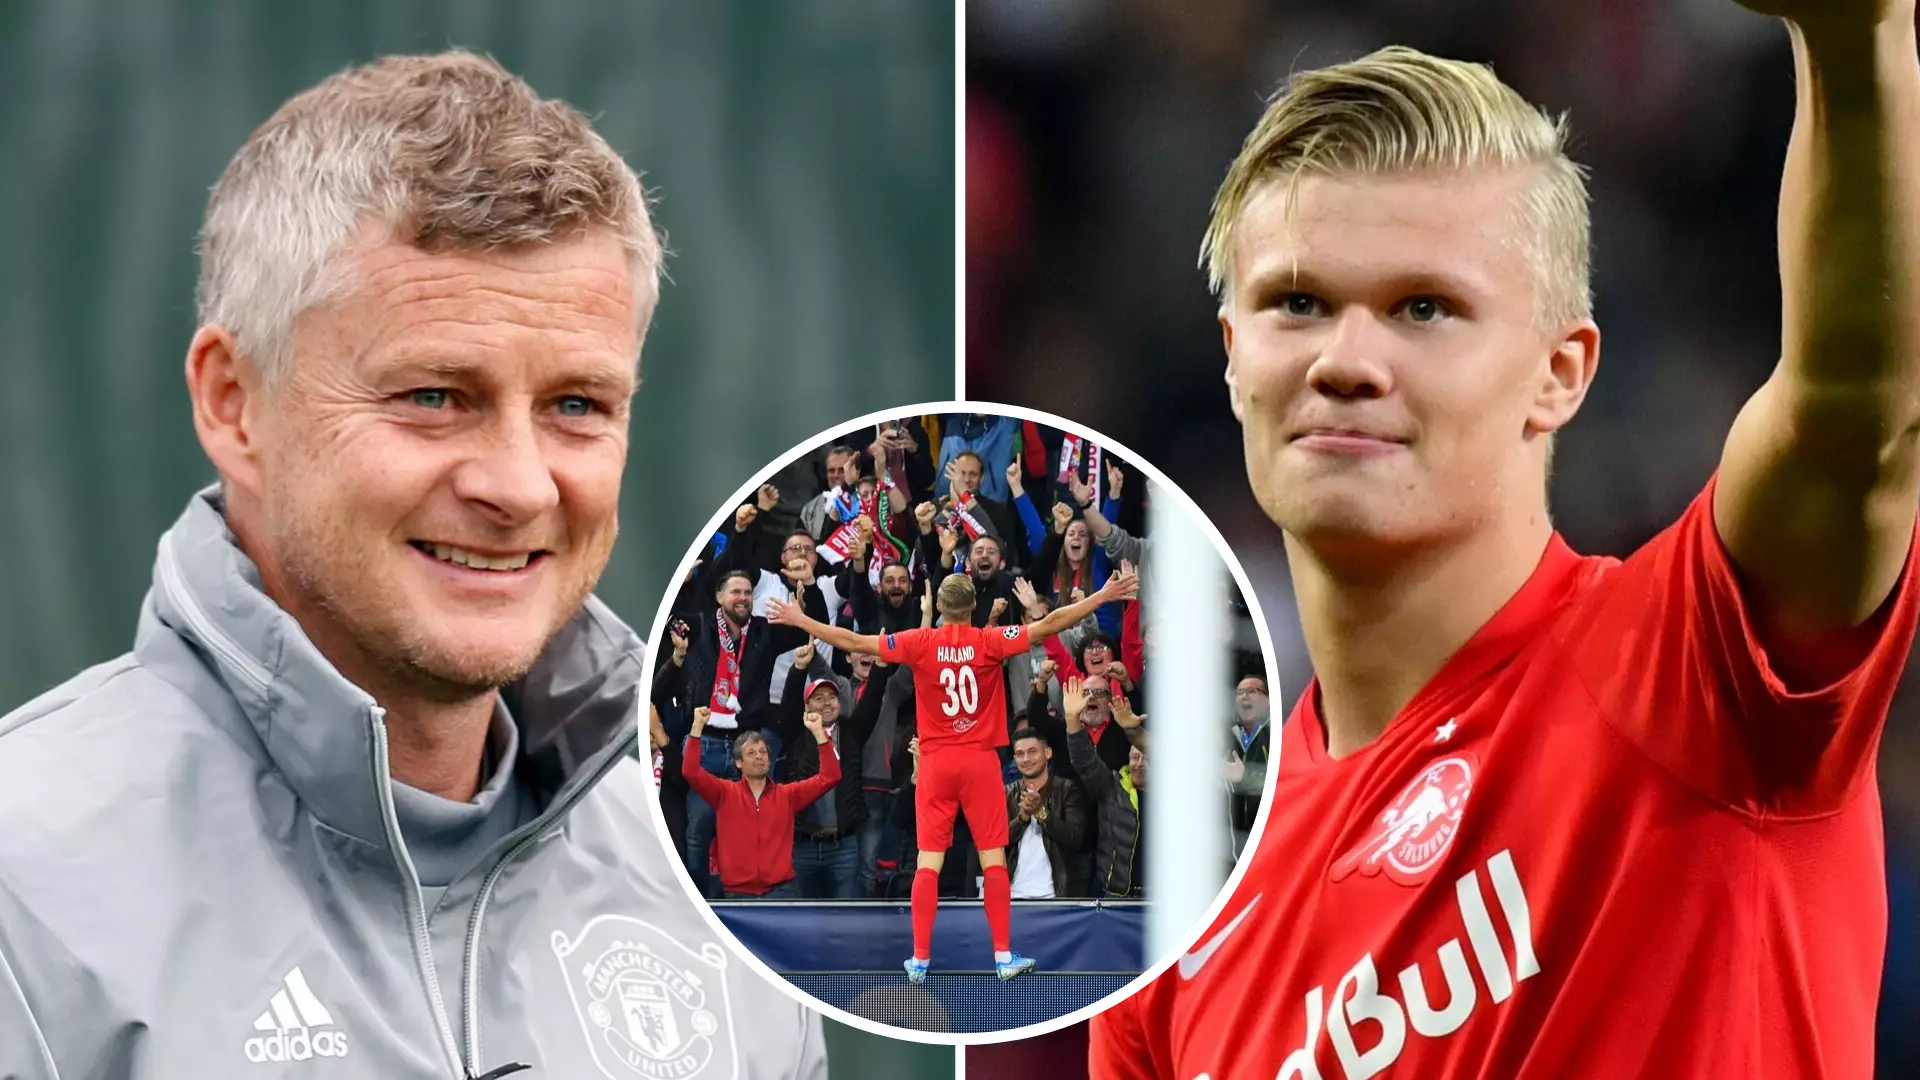 Erling Braut Haland’s Father Opens Up About His Son Signing For Manchester United